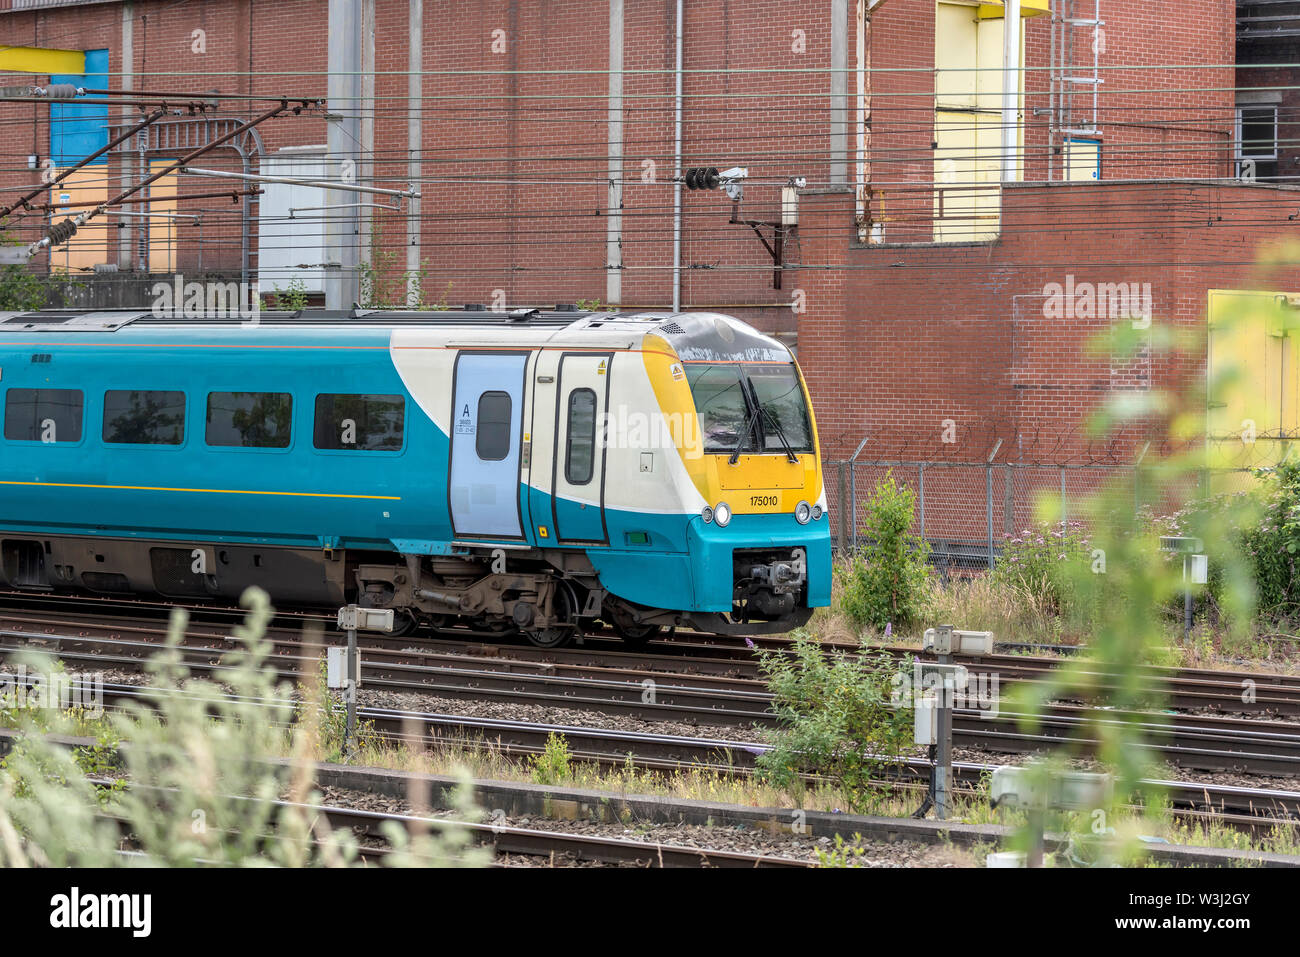 Class 175 Arriva diesel train.  Class 175 Coradia is a type of diesel multiple unit part of the Coradia family of trains Stock Photo